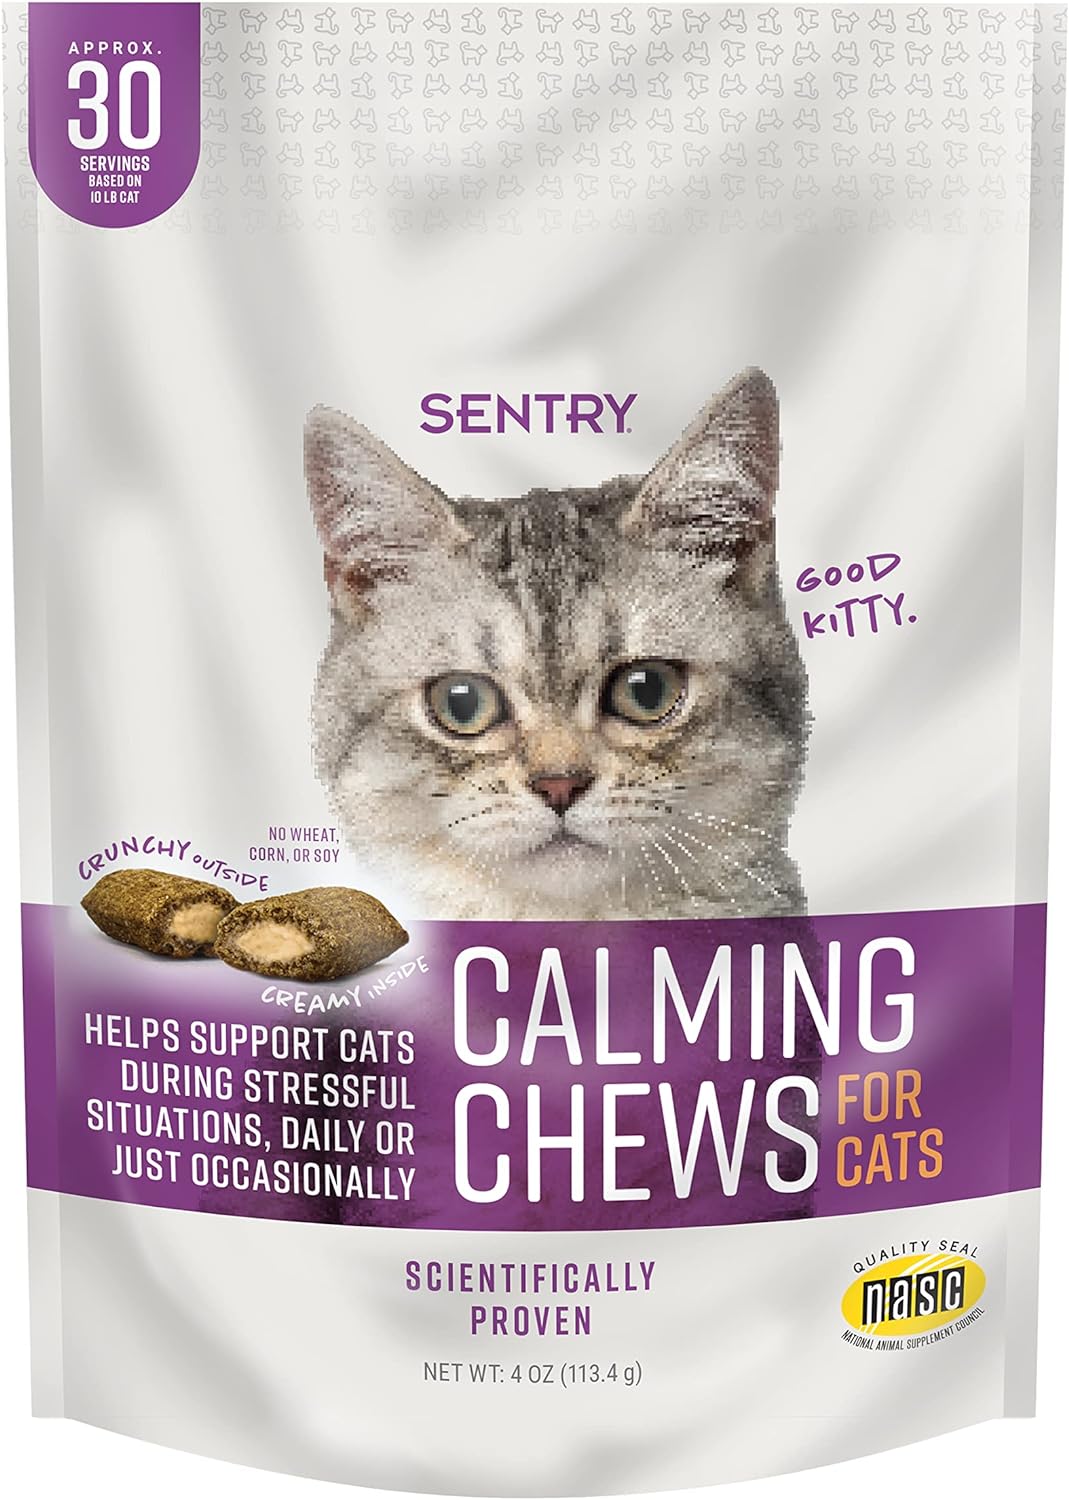 Sentry Calming Chews for Cats, Calming Aid Helps to Manage Stress & Anxiety, With Pheromones That May Help Curb Destructive Behavior & Separation Anxiety, Calming Health Supplement for Cats, 4 oz